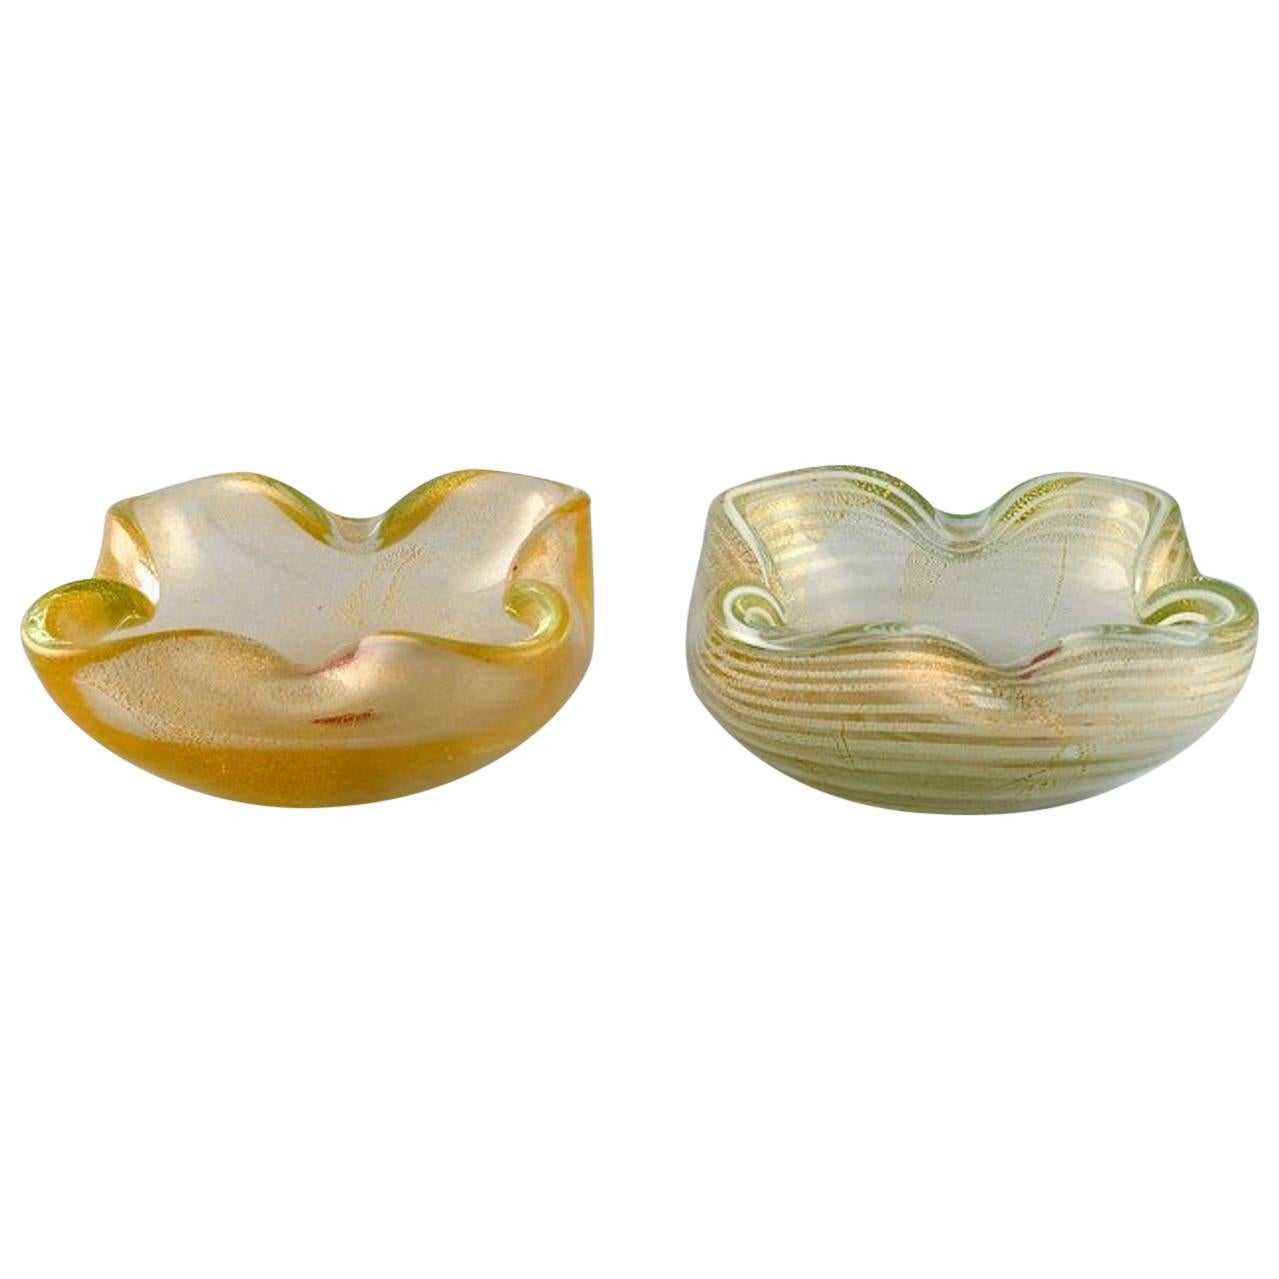 Two Murano Bowls in Mouth Blown Art Glass, Italian Design, 1960s For Sale